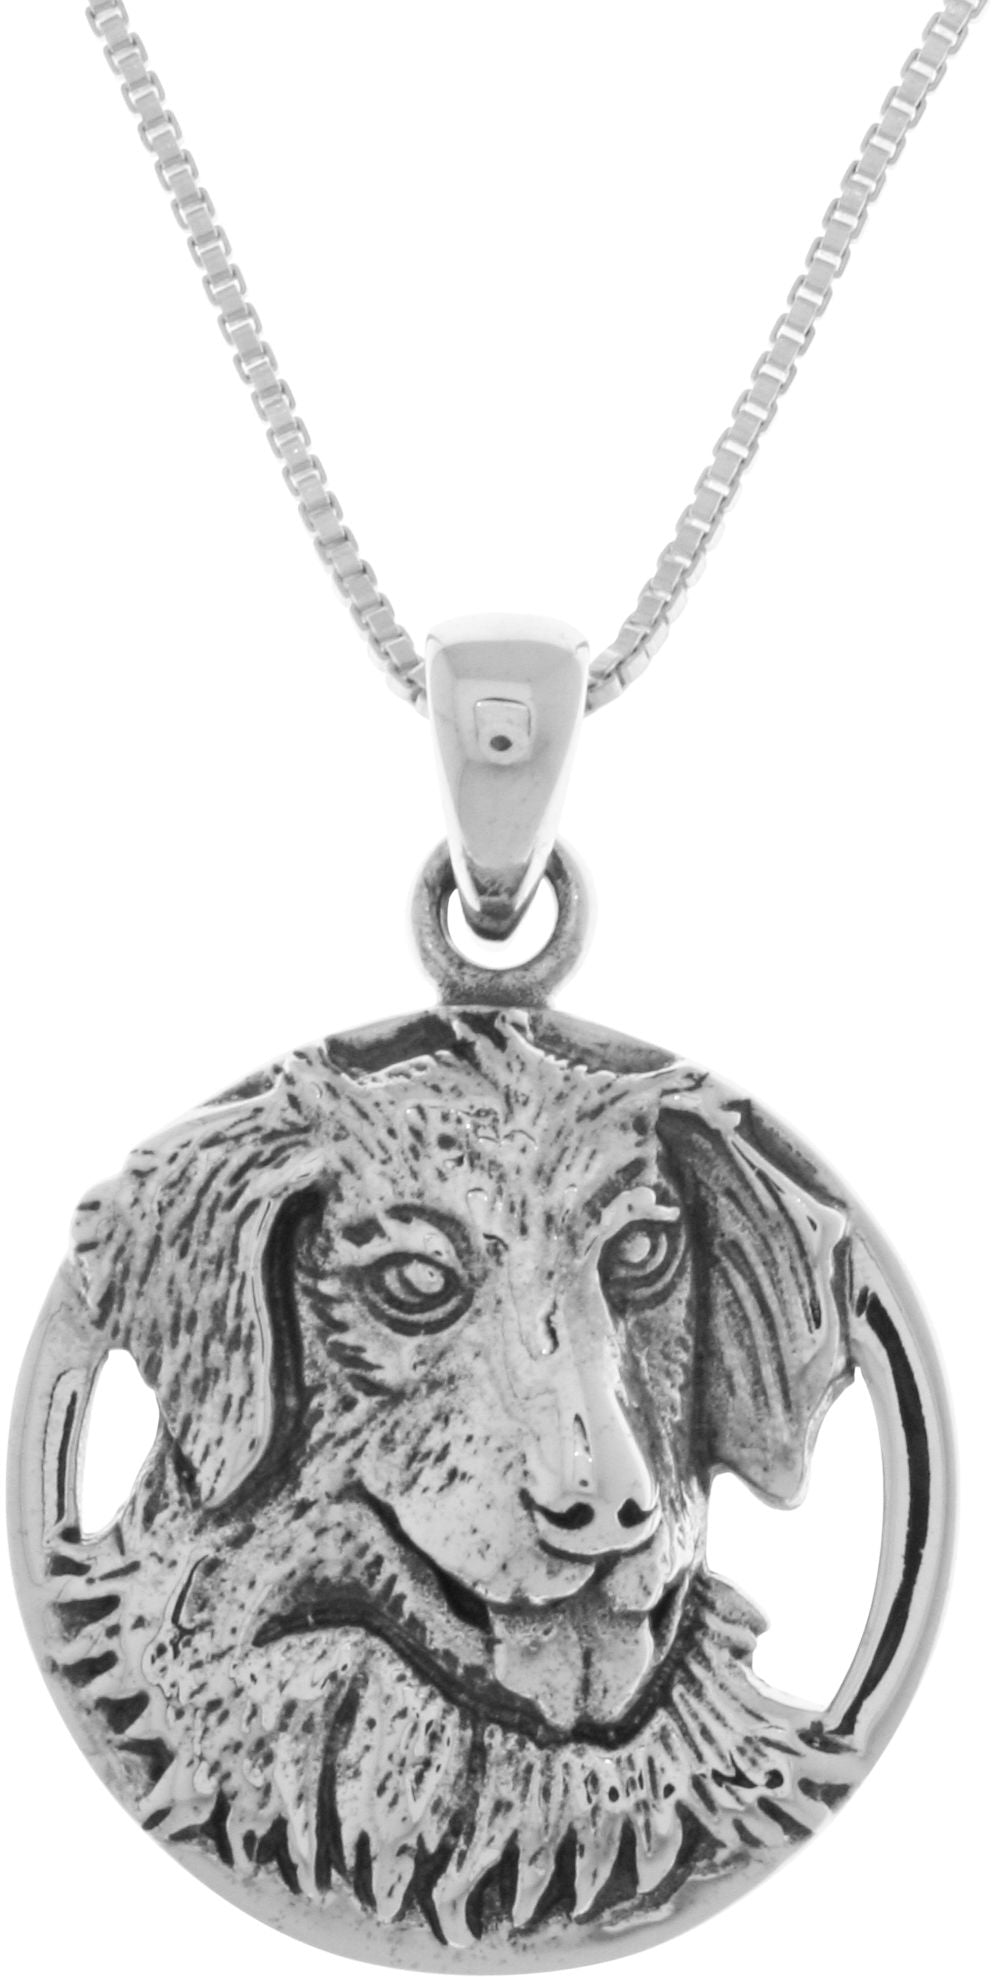 Jewelry Trends Sterling Silver Golden Retriever Canine Dog Pendant on 18 Inch Box Chain Necklace